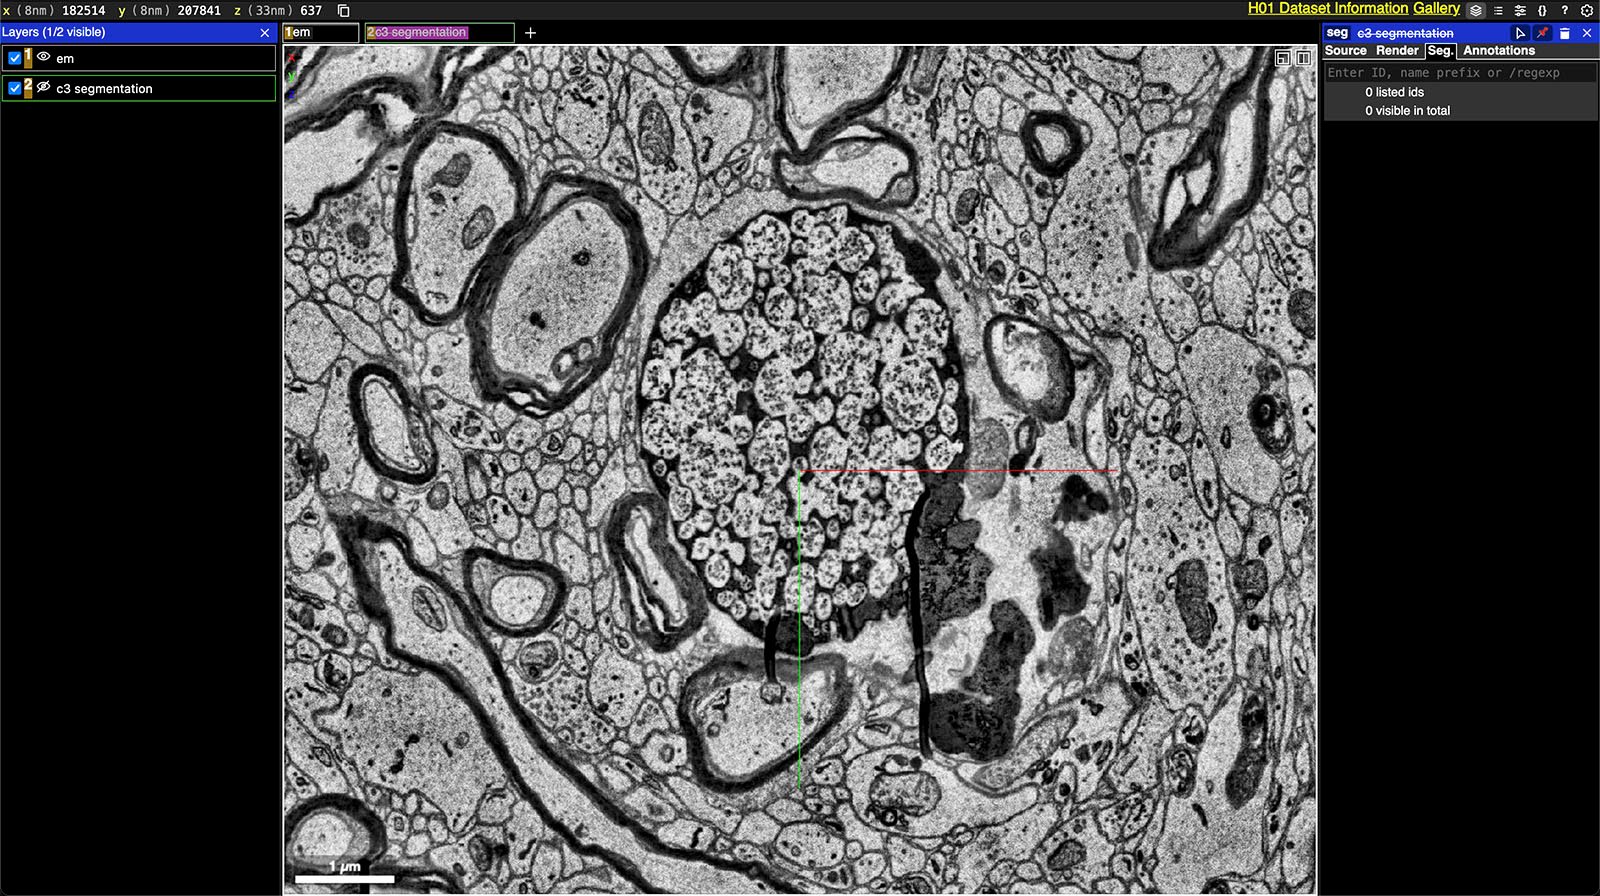 Electron micrograph displaying intricate details of cellular structures, with a focus on a specific cell indicated by red markers. A scale bar is present for size reference.